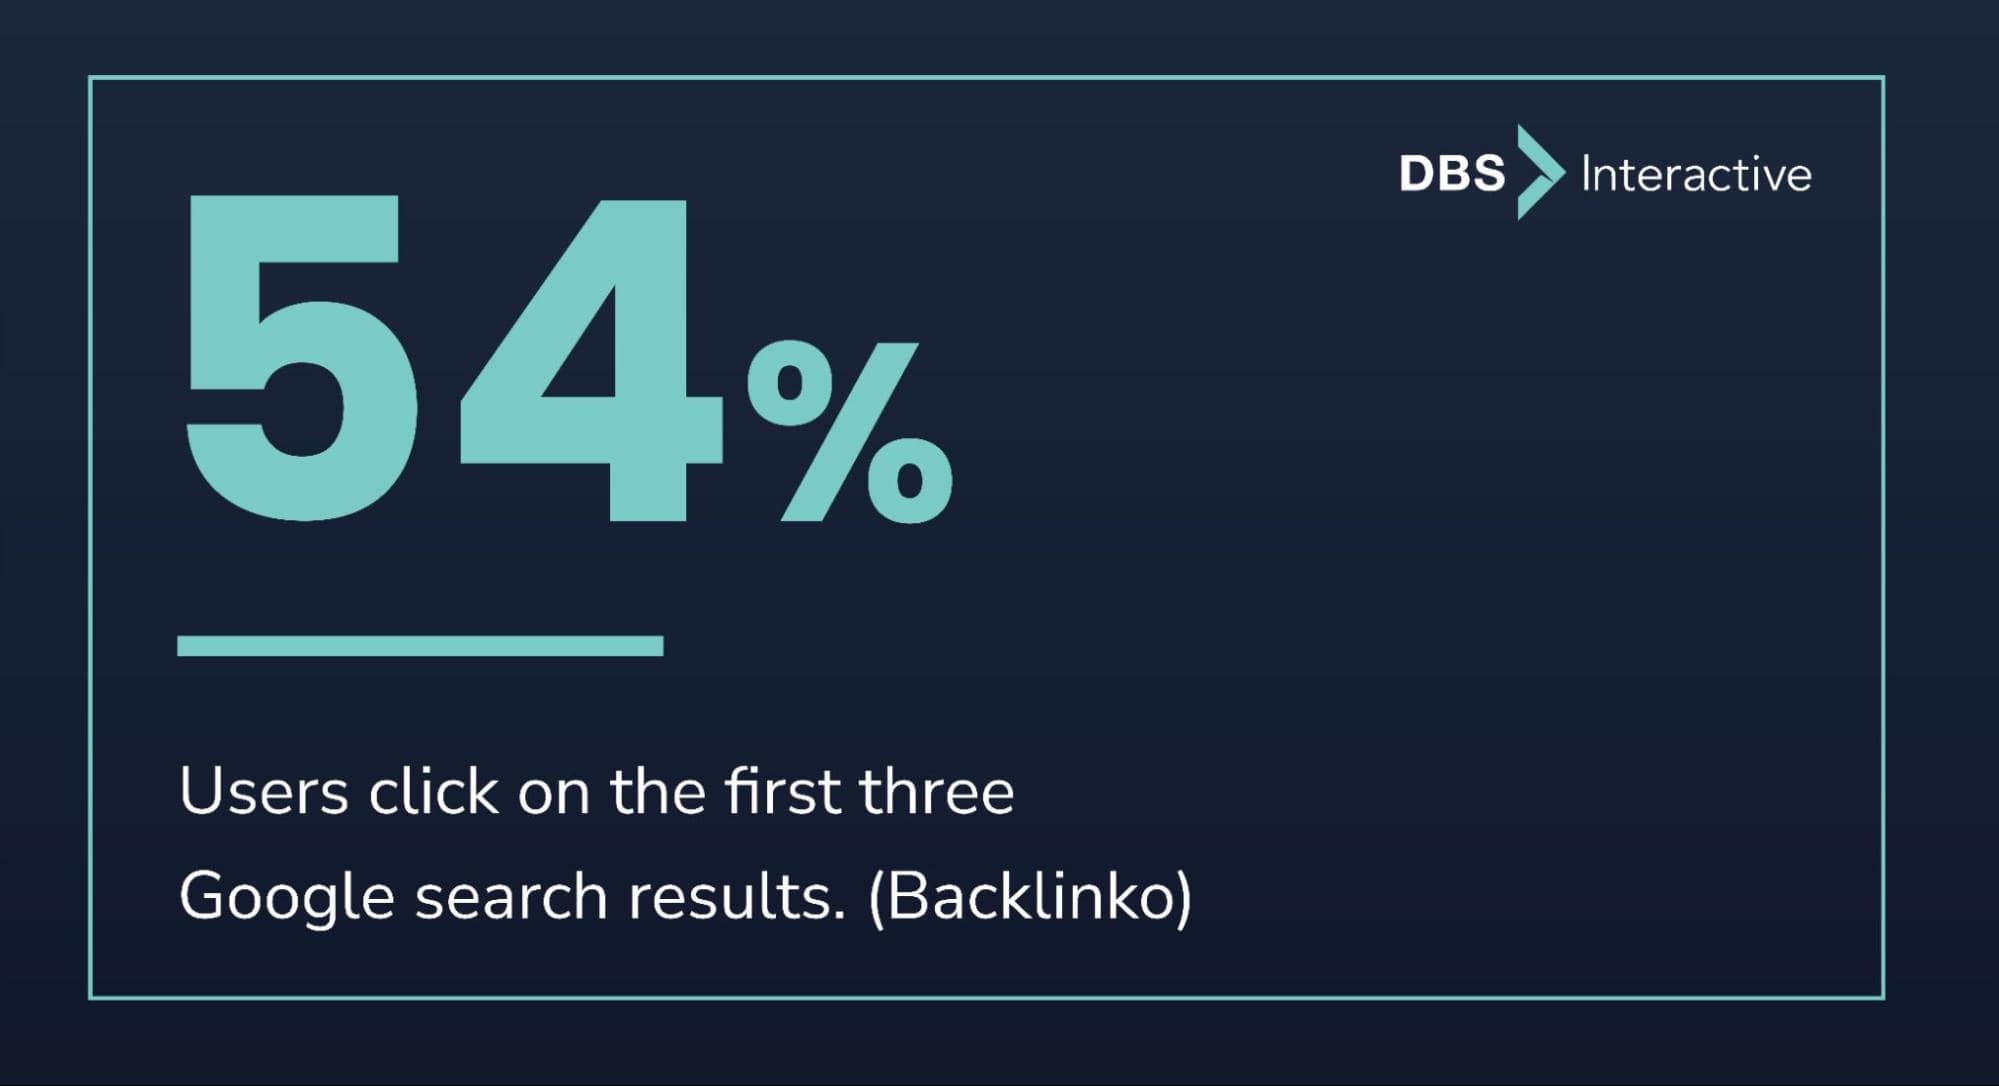 54% of users click on the first three Google search results